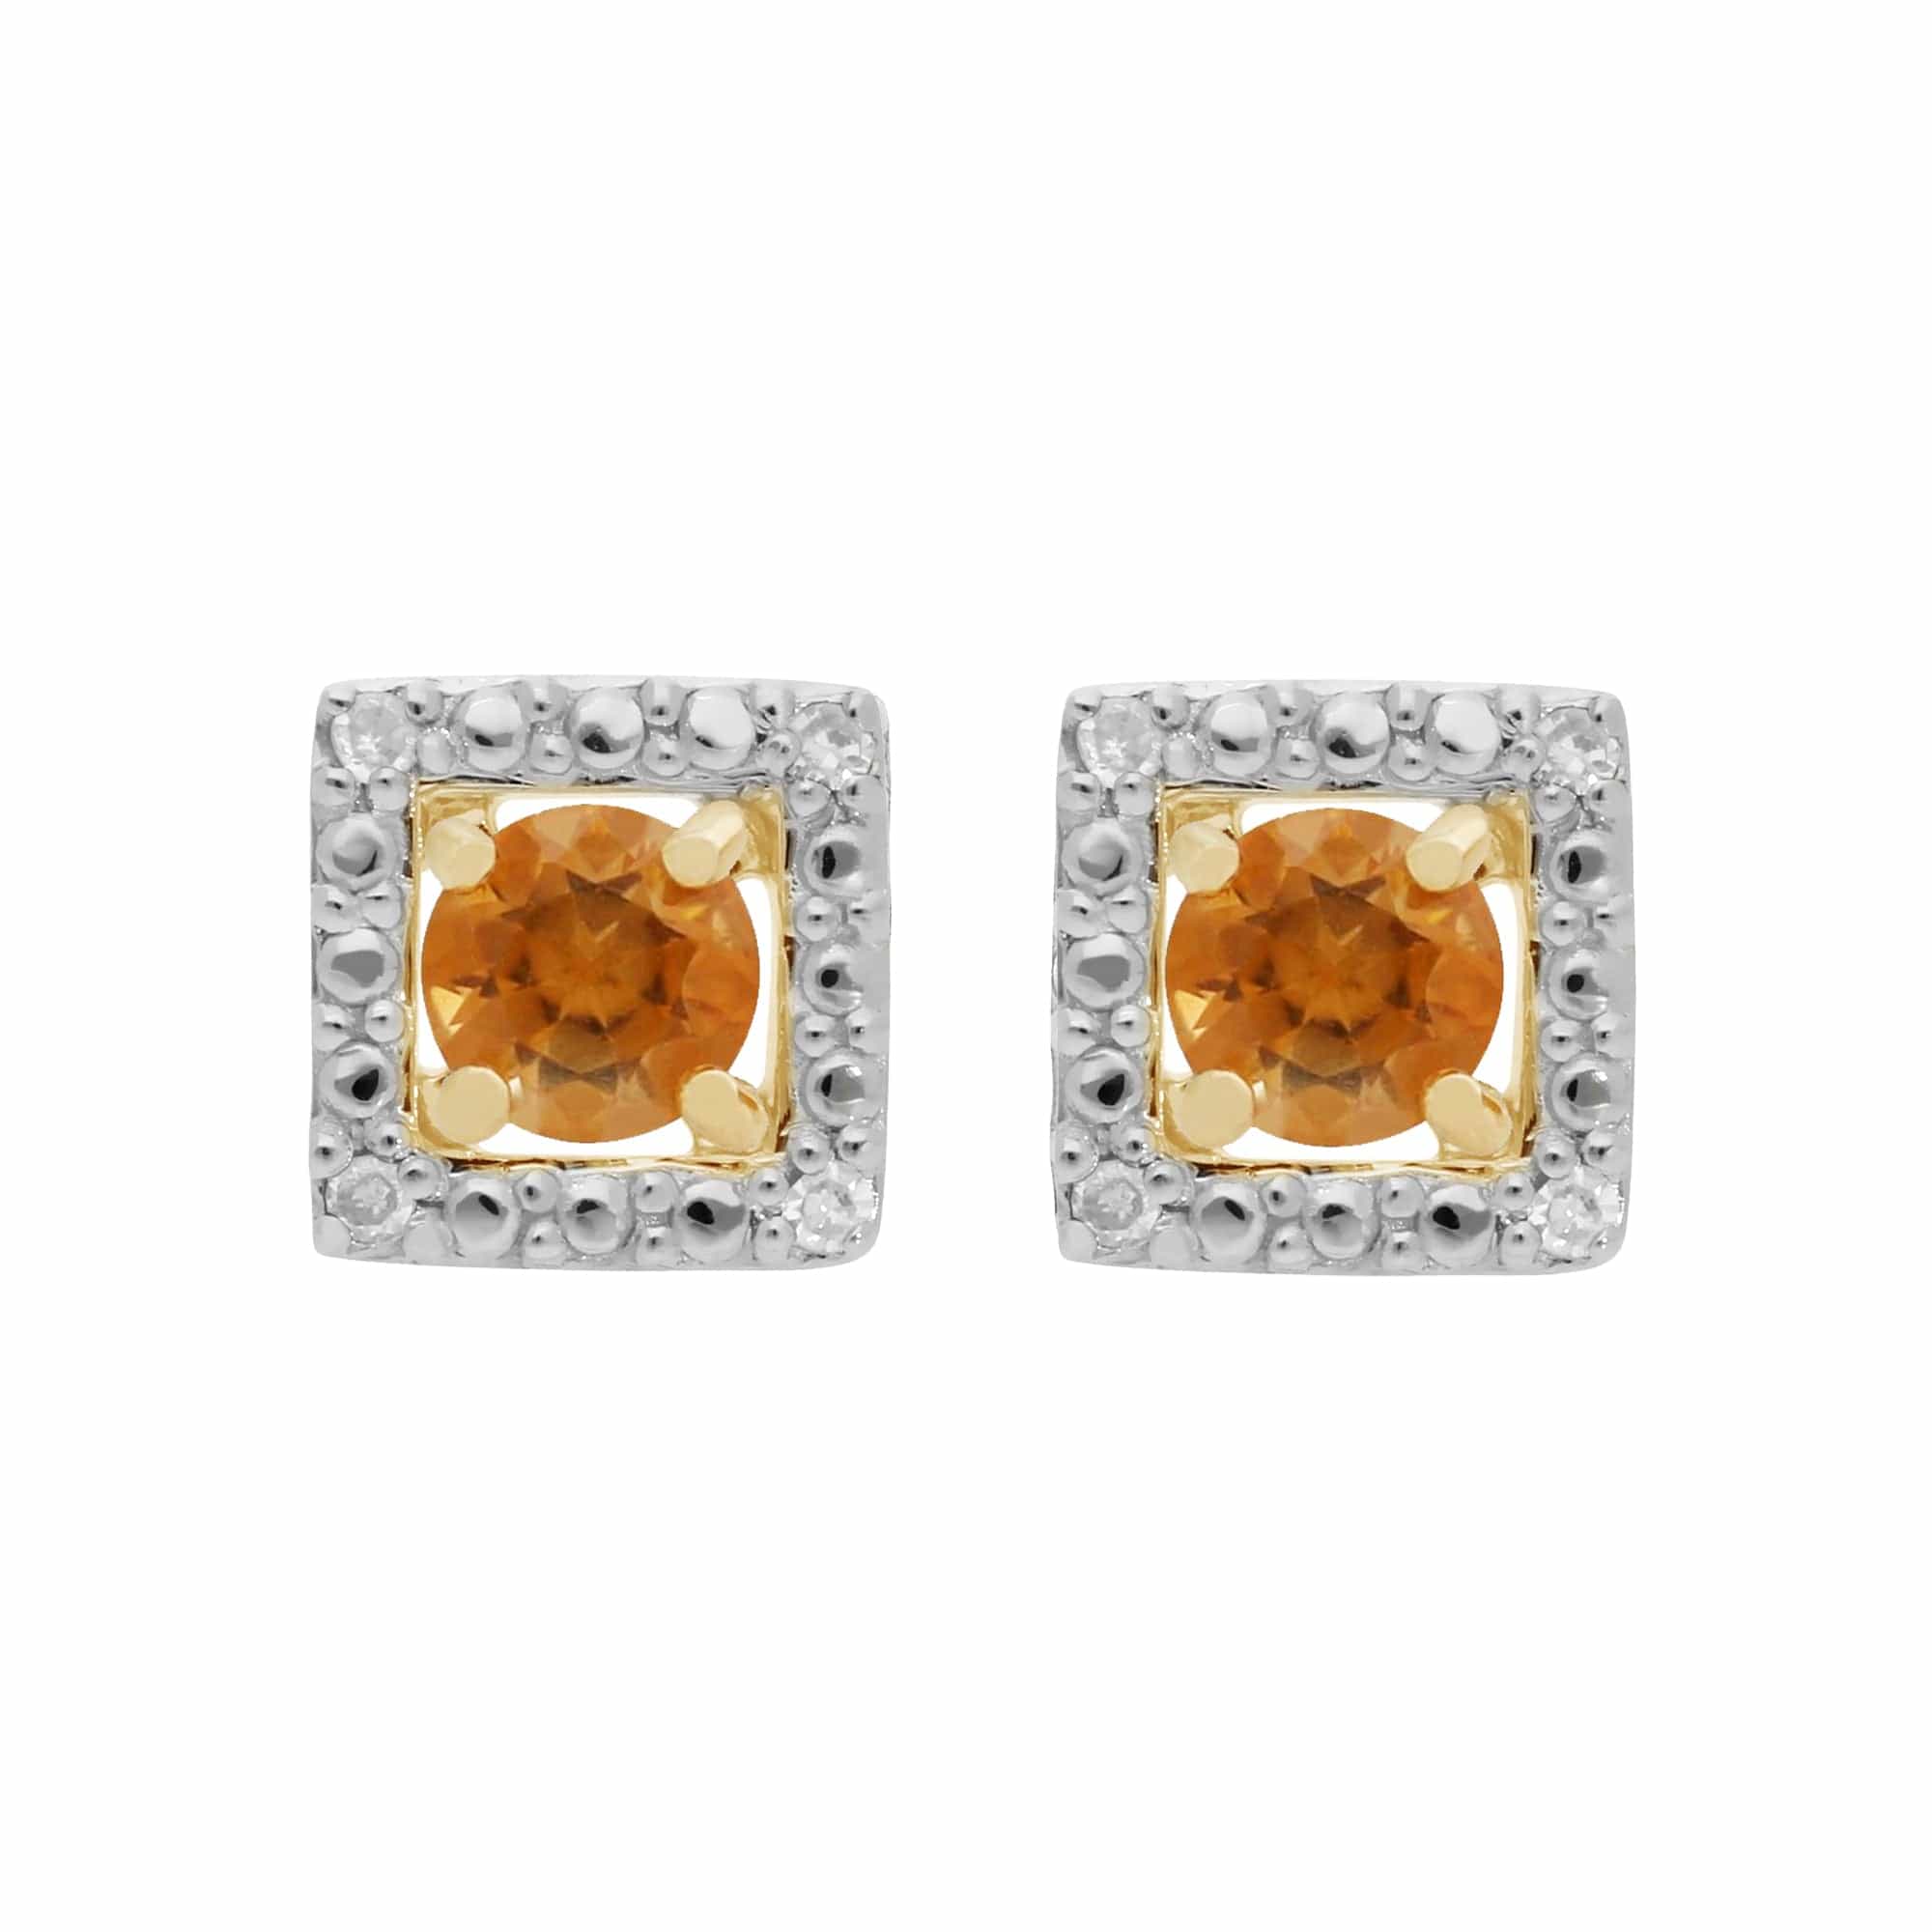 183E0083139-191E0379019 Classic Round Citrine Stud Earrings with Detachable Diamond Square Earrings Jacket Set in 9ct Yellow Gold 1